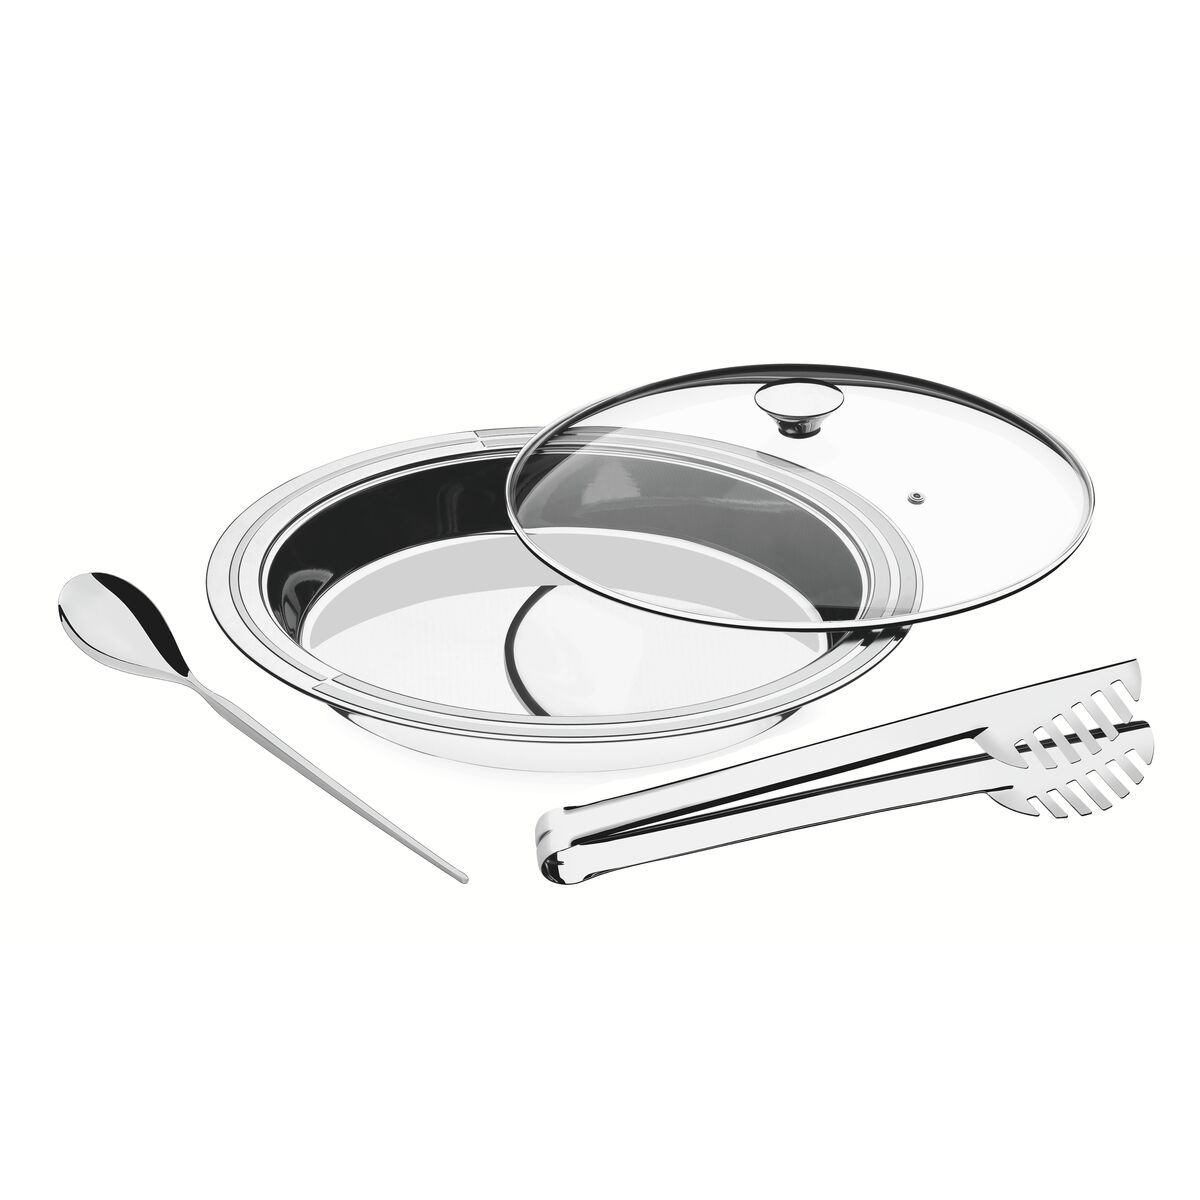 Tramontina Ciclo round stainless steel serving set, 3 pc set